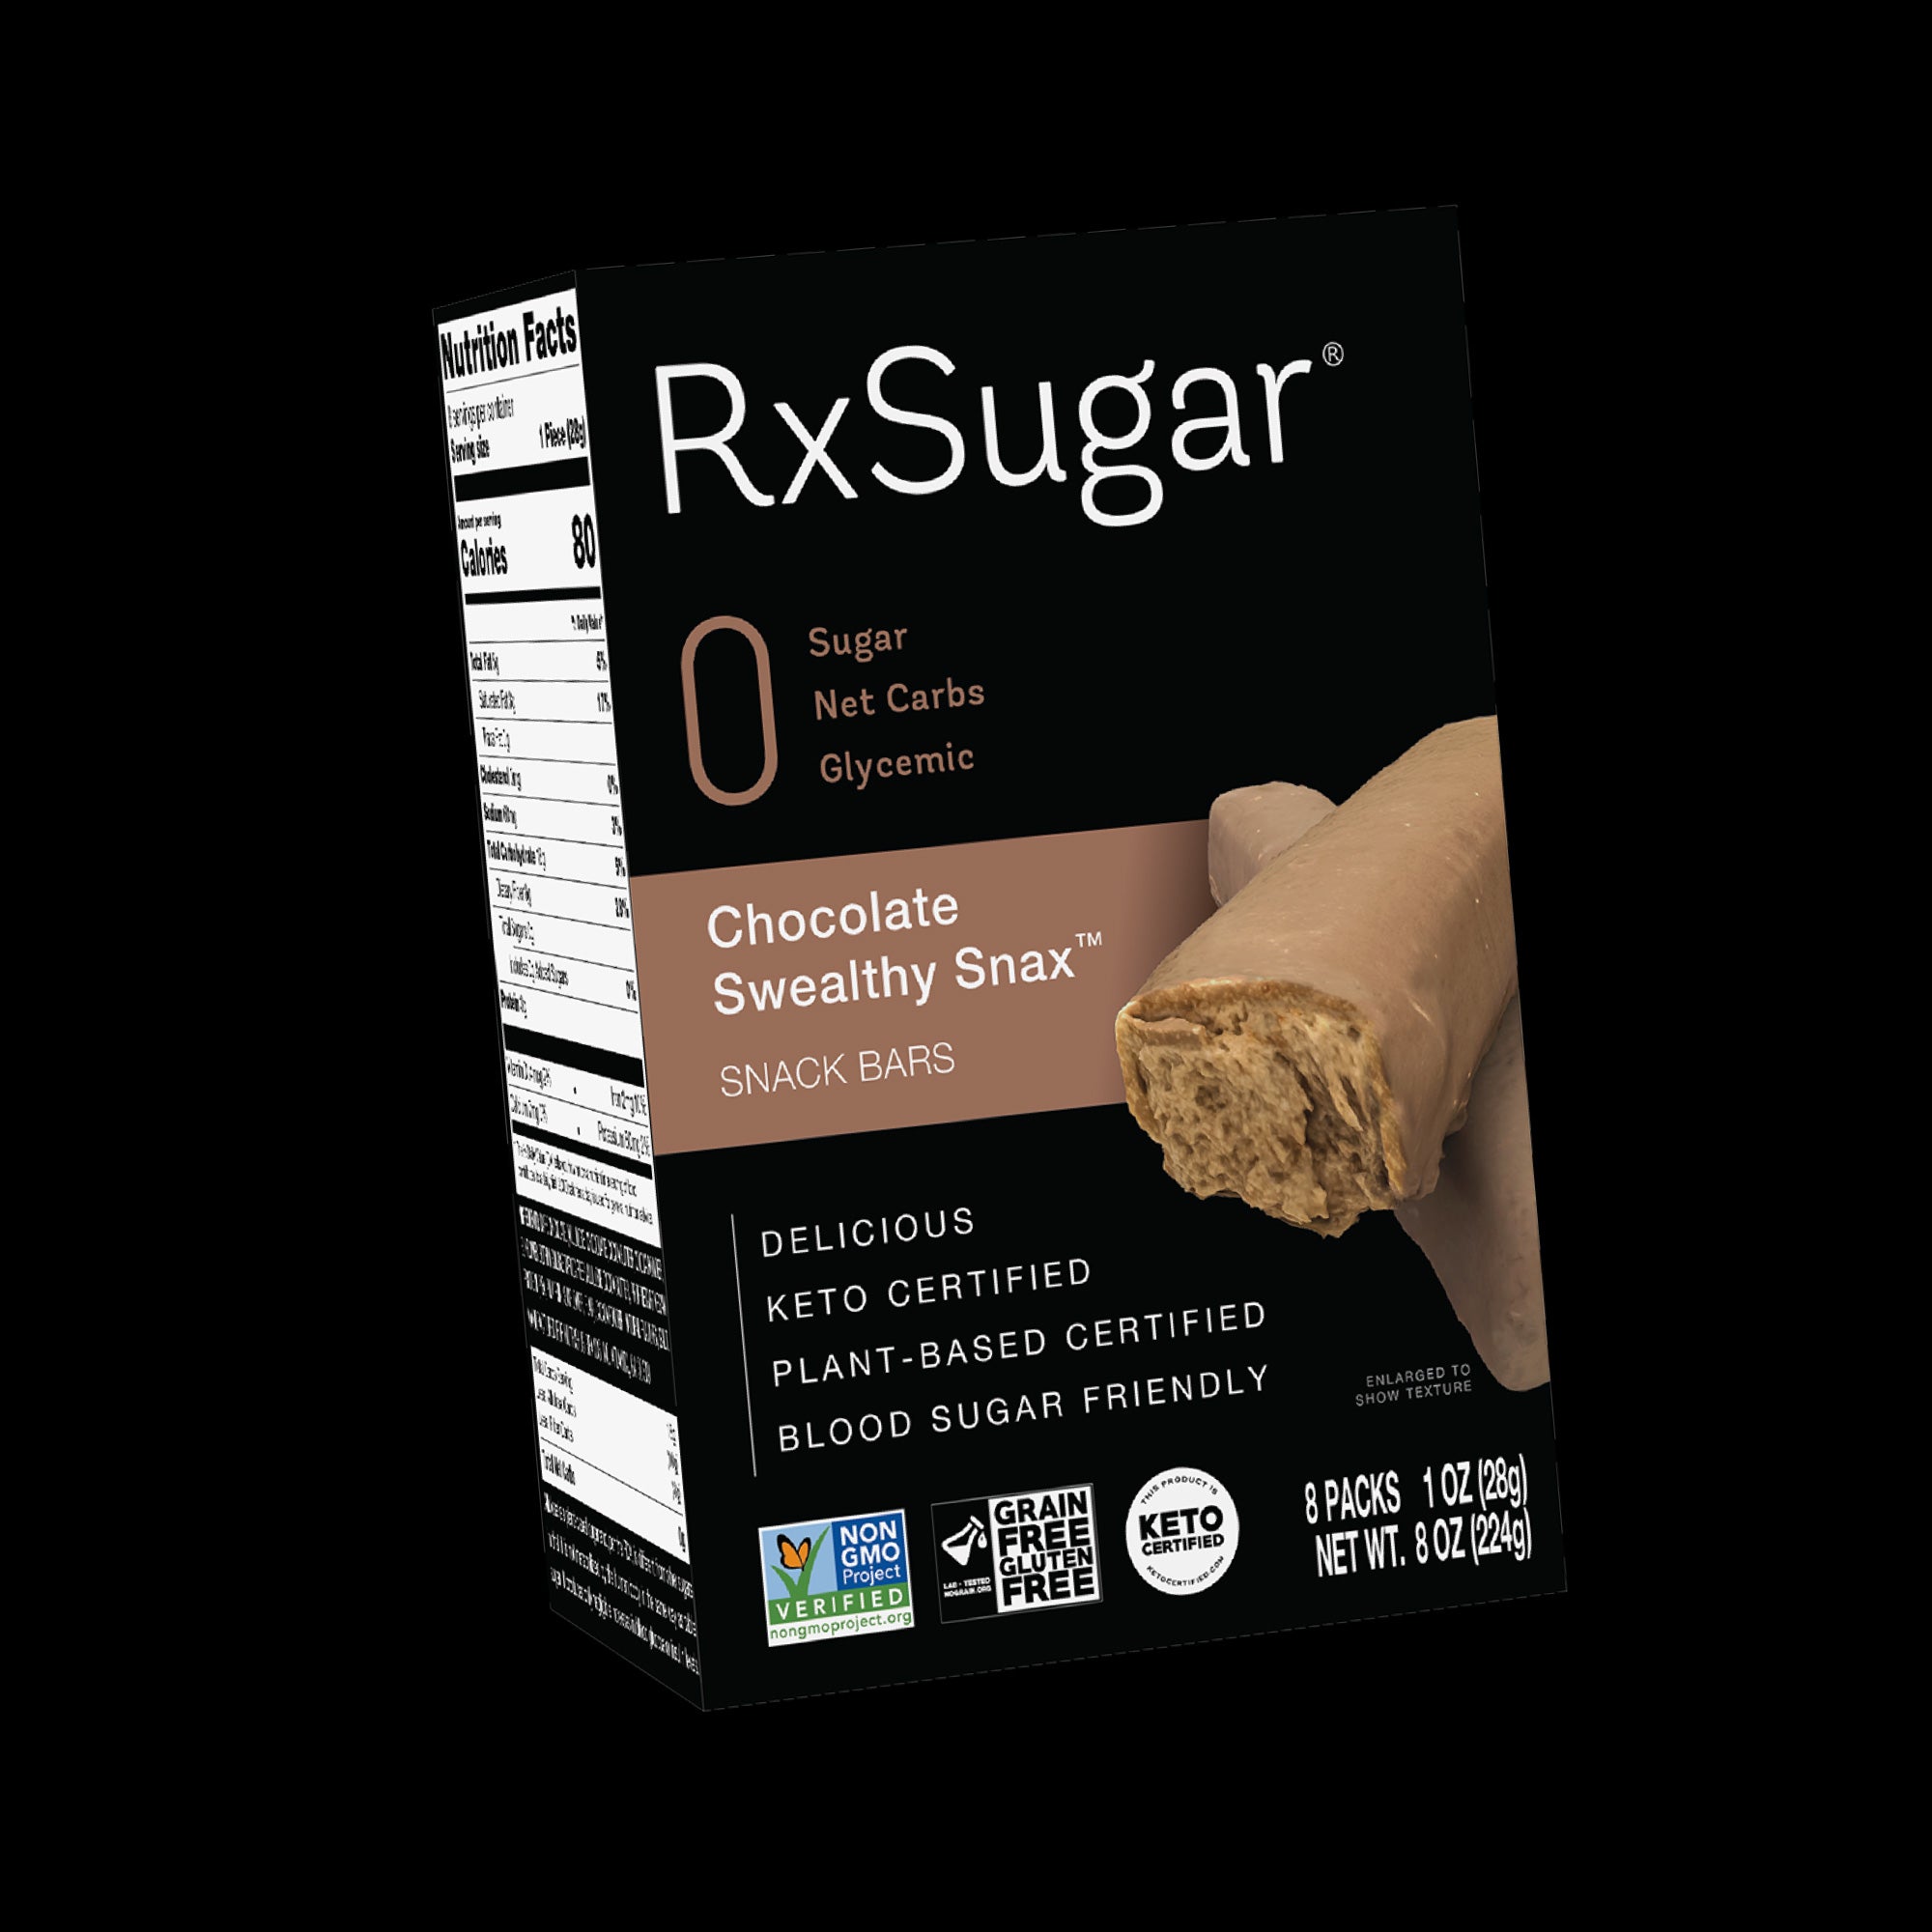 RxSugar Swealthy Snax Chocolate Candy Bar Carton diabetes sugar free candy made with allulose on a black background